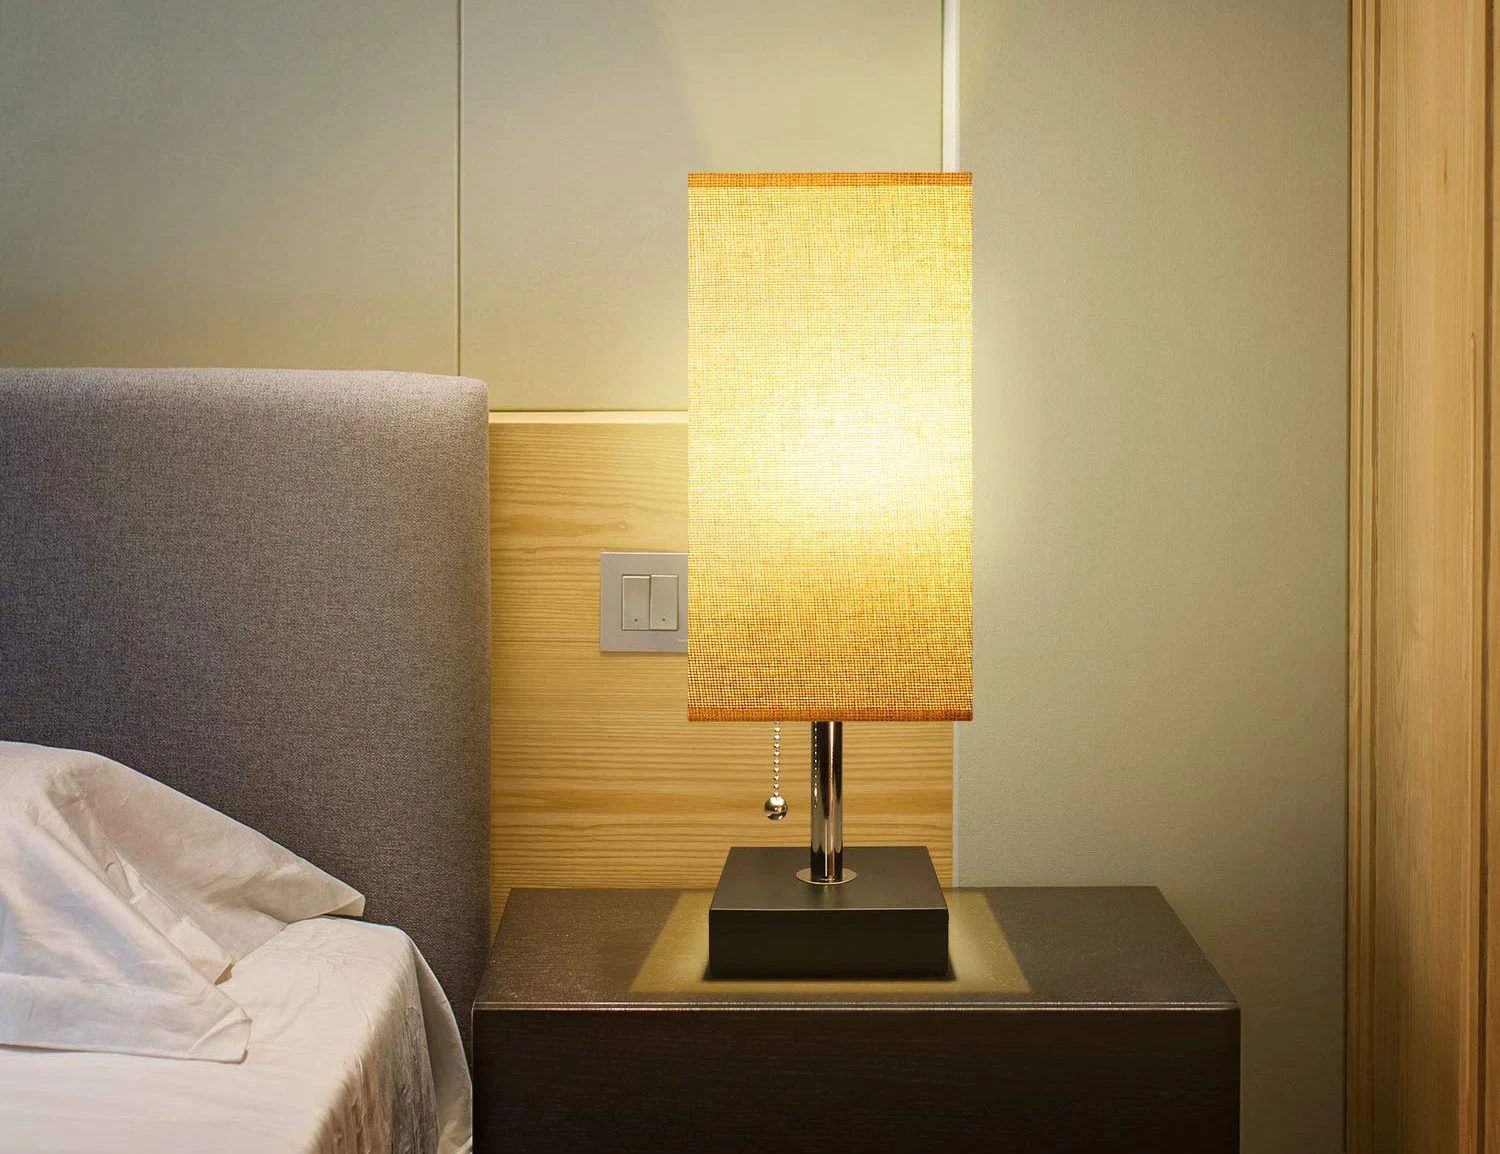 How do you determine the best price for bedroom lamp?